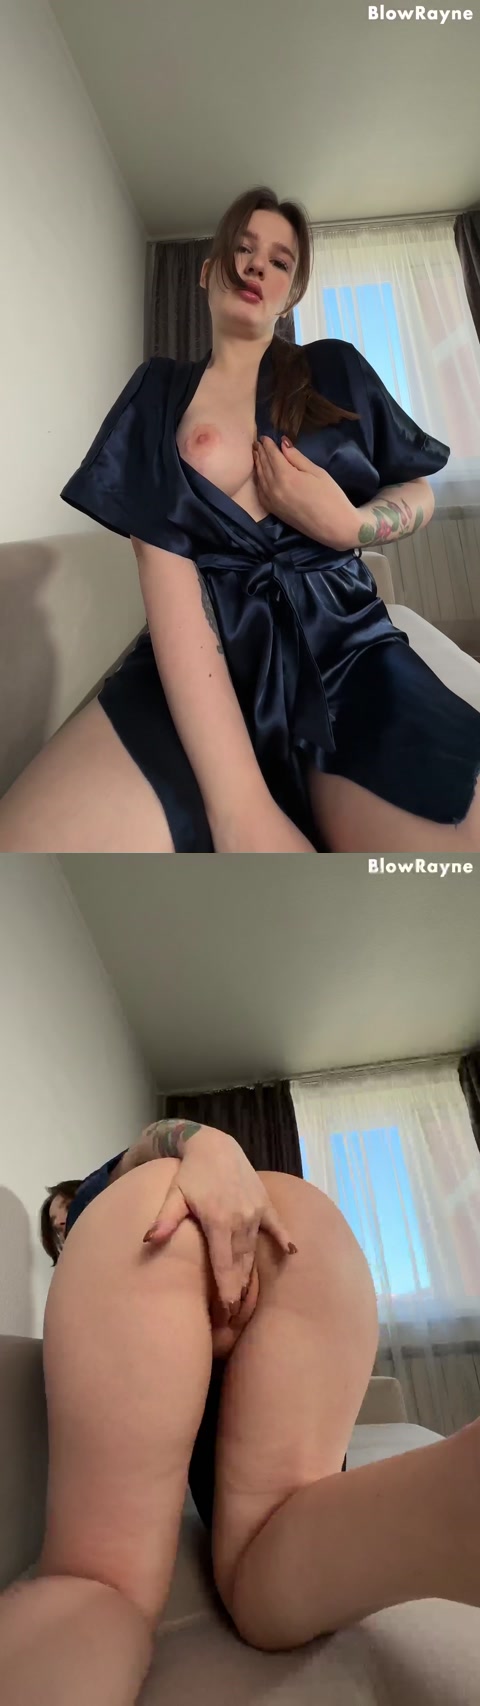 Clips4Sale (2024) BlowRayne POV Cowgirl Blowjob Facial Download